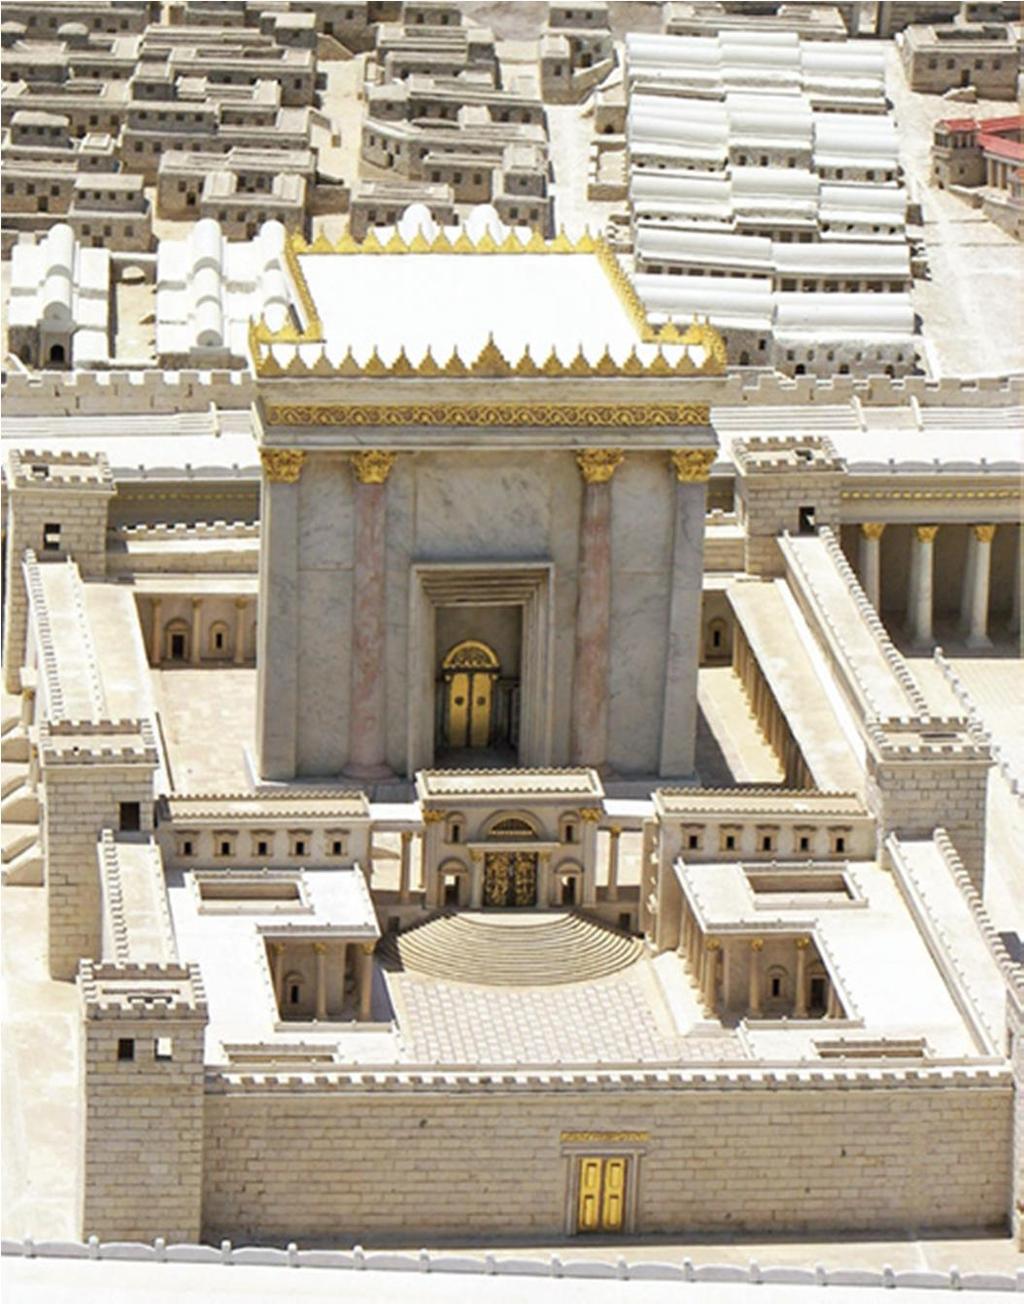 Herod s Temple - destroyed in 70 AD Herod s Temple Herod the Great rebuilt the Jerusalem Temple, making it one of the wonders of the